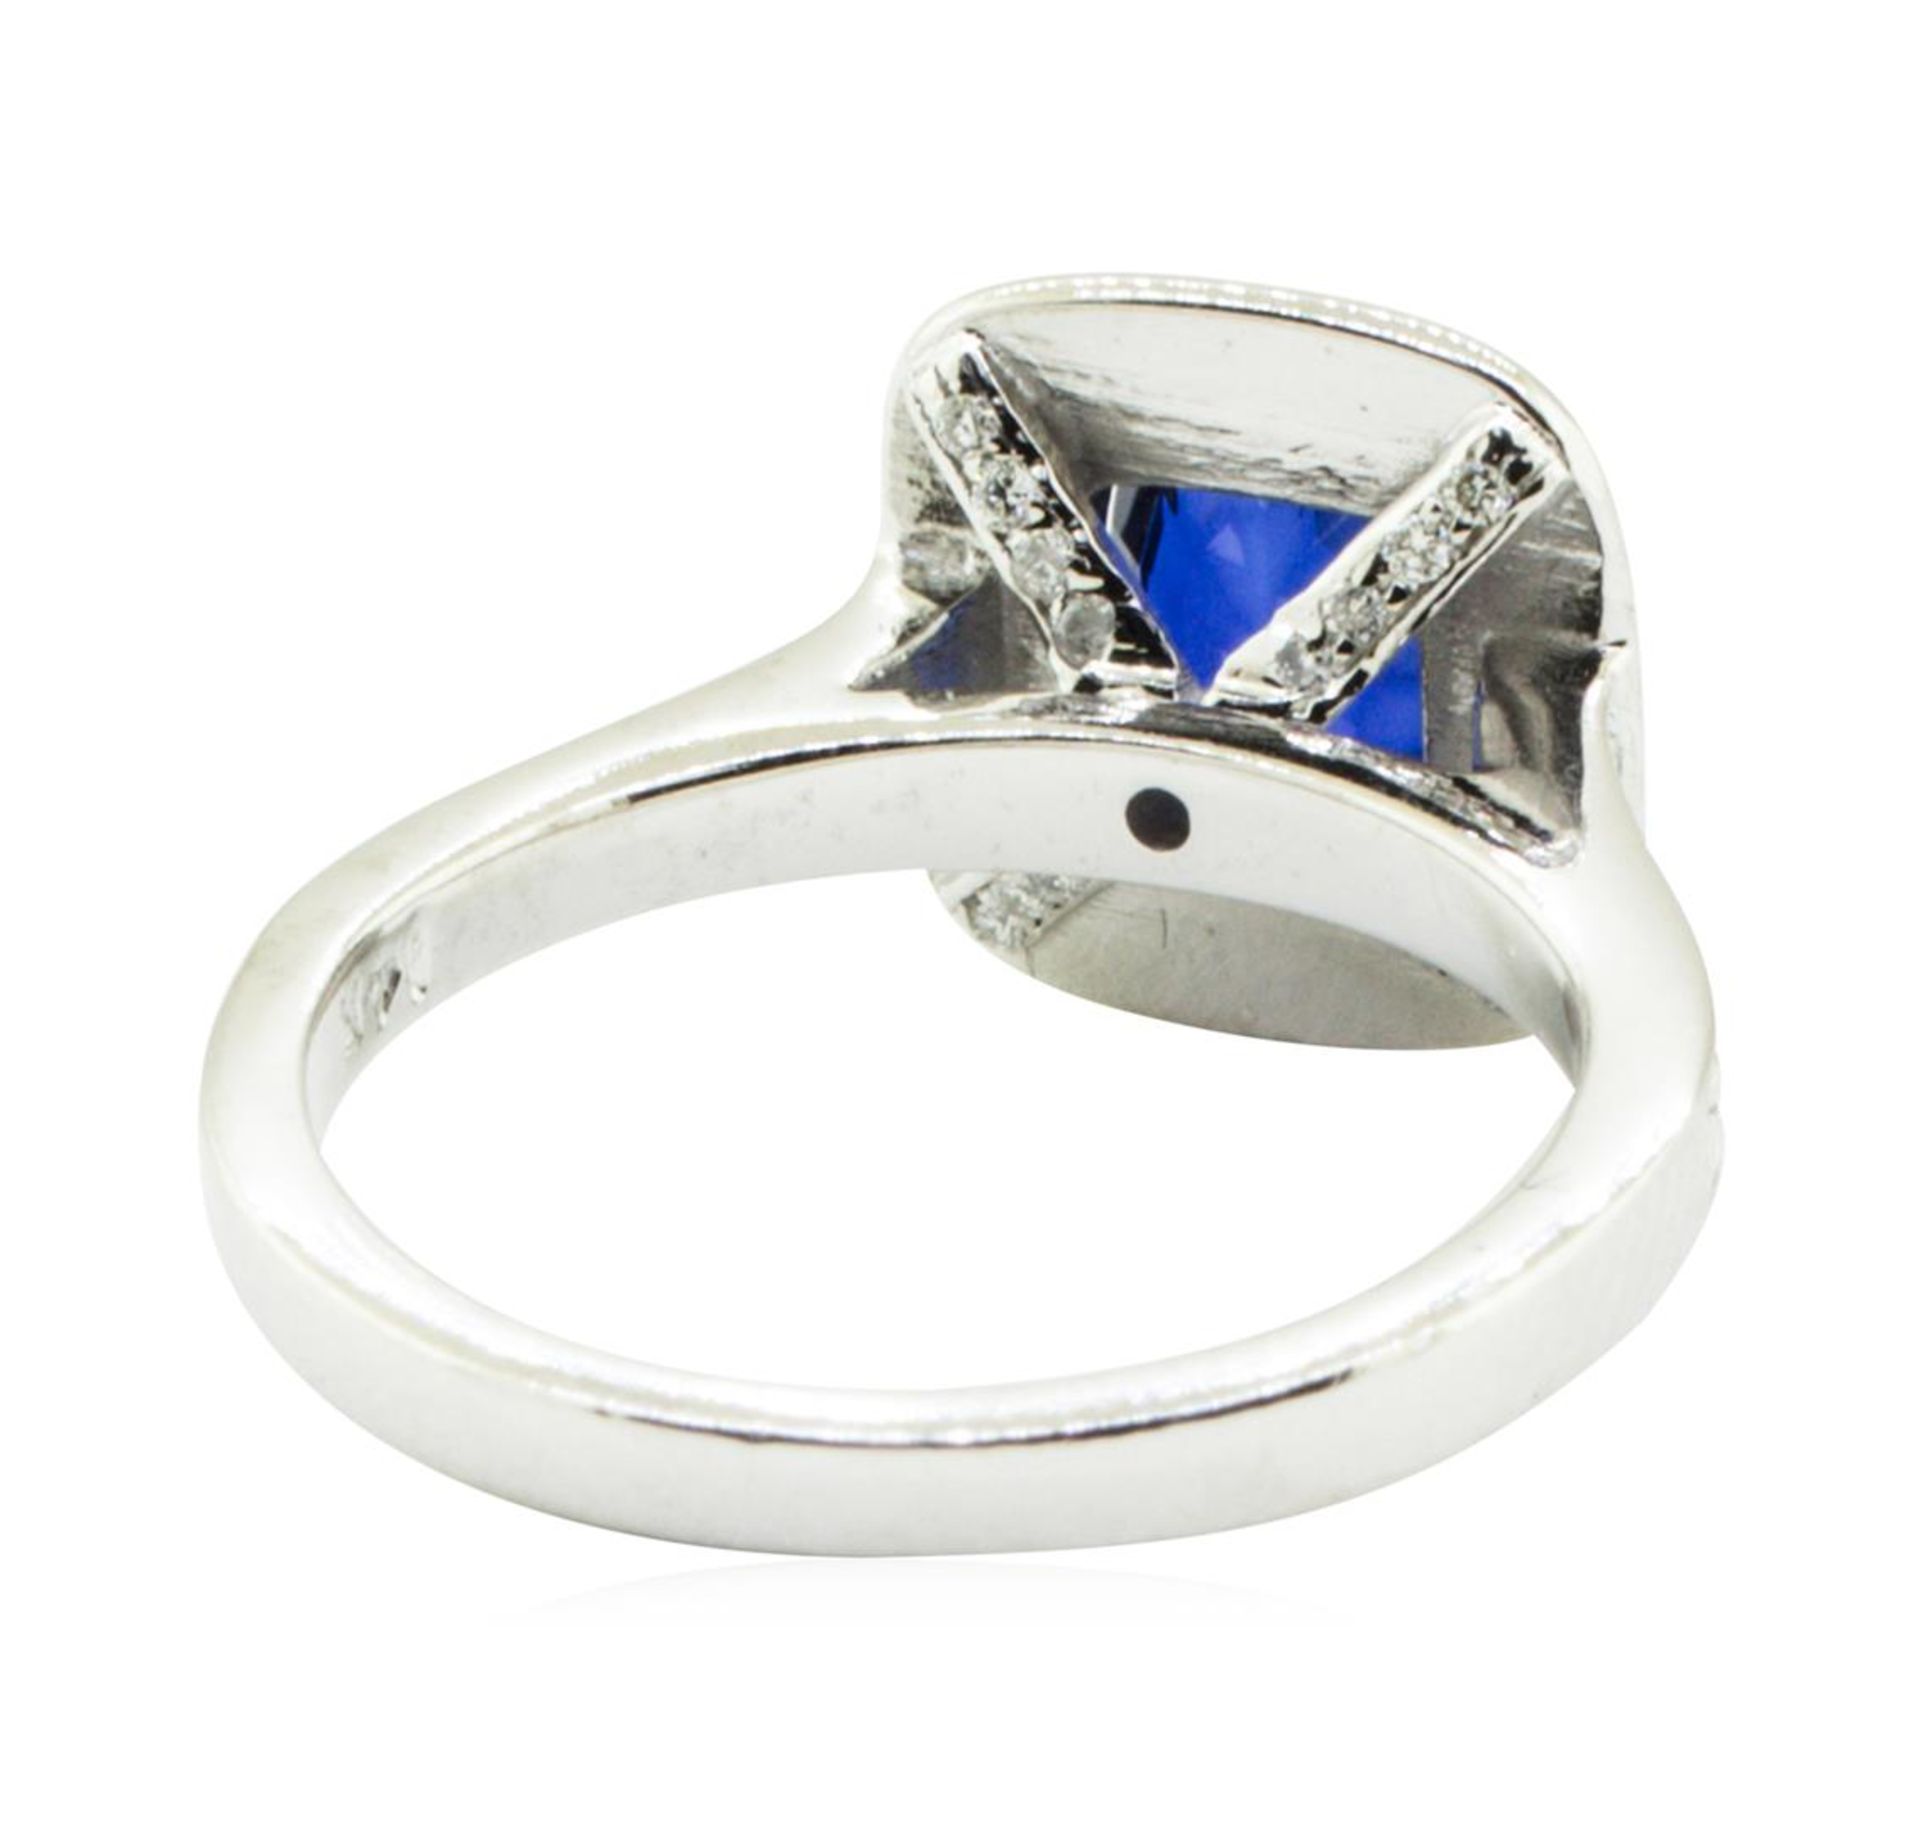 1.68 ctw Oval Brilliant Blue Sapphire And Diamond Ring - 14KT White Gold - Image 3 of 5